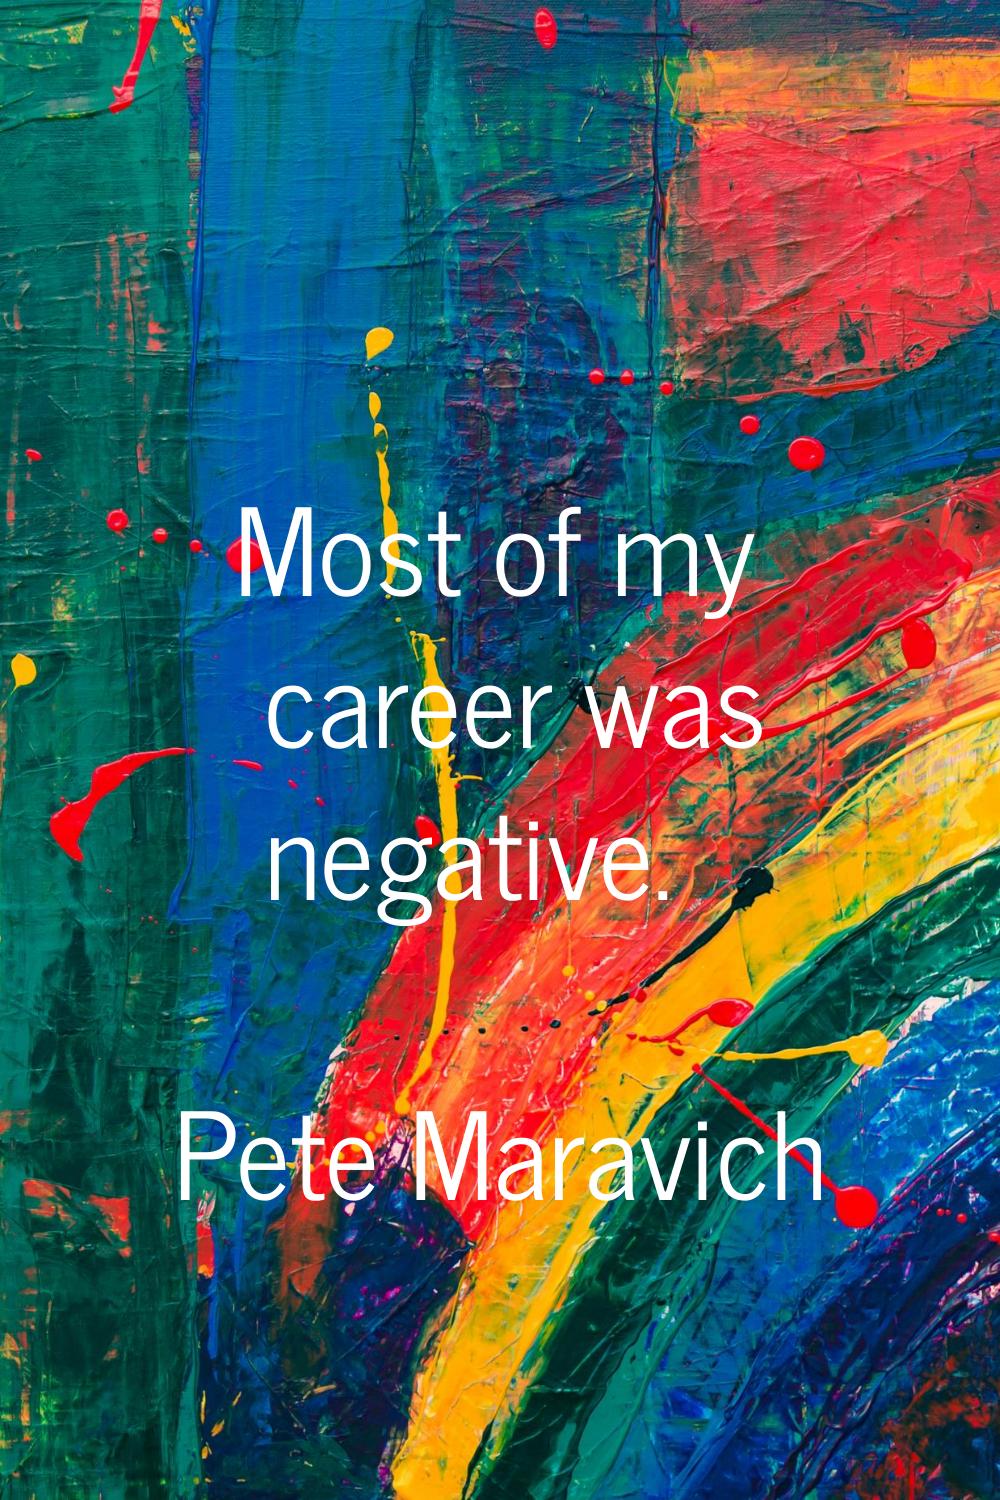 Most of my career was negative.